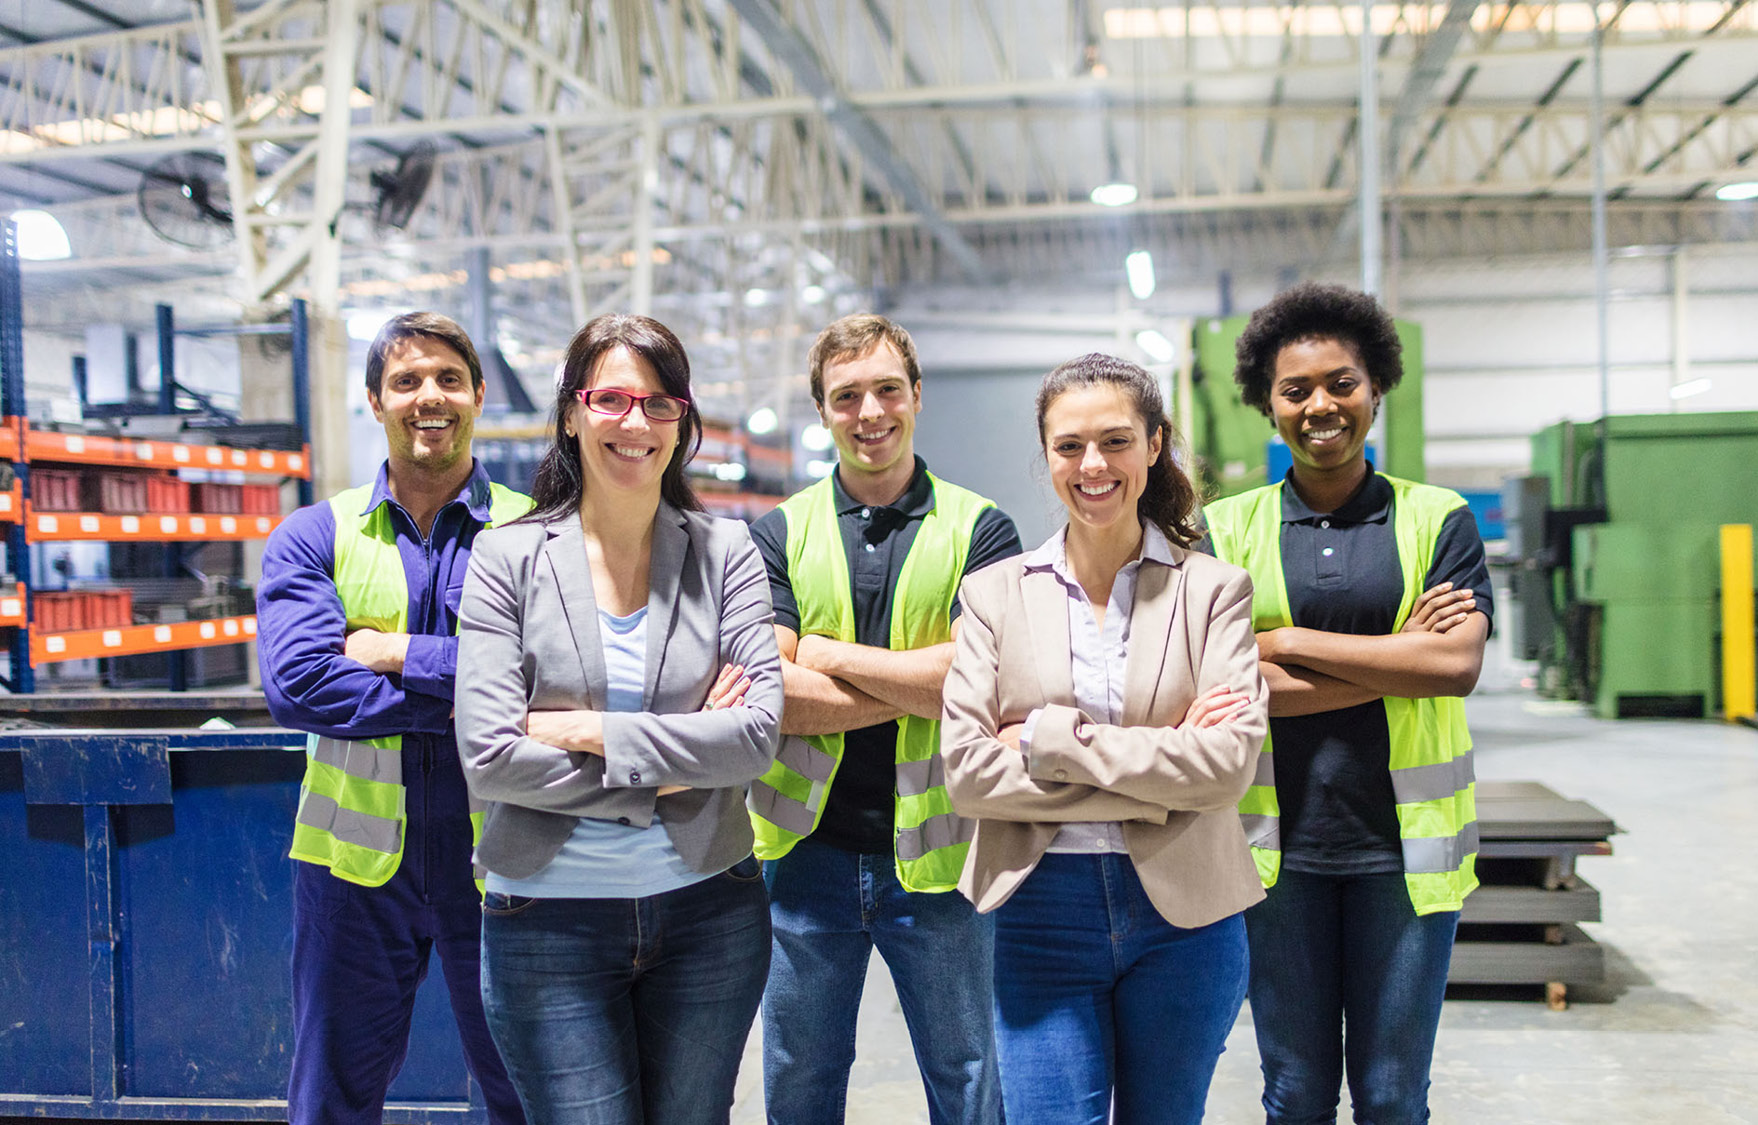 Group portrait of staff at distribution warehouse. Warehouse team standing with arms crossed in factory.